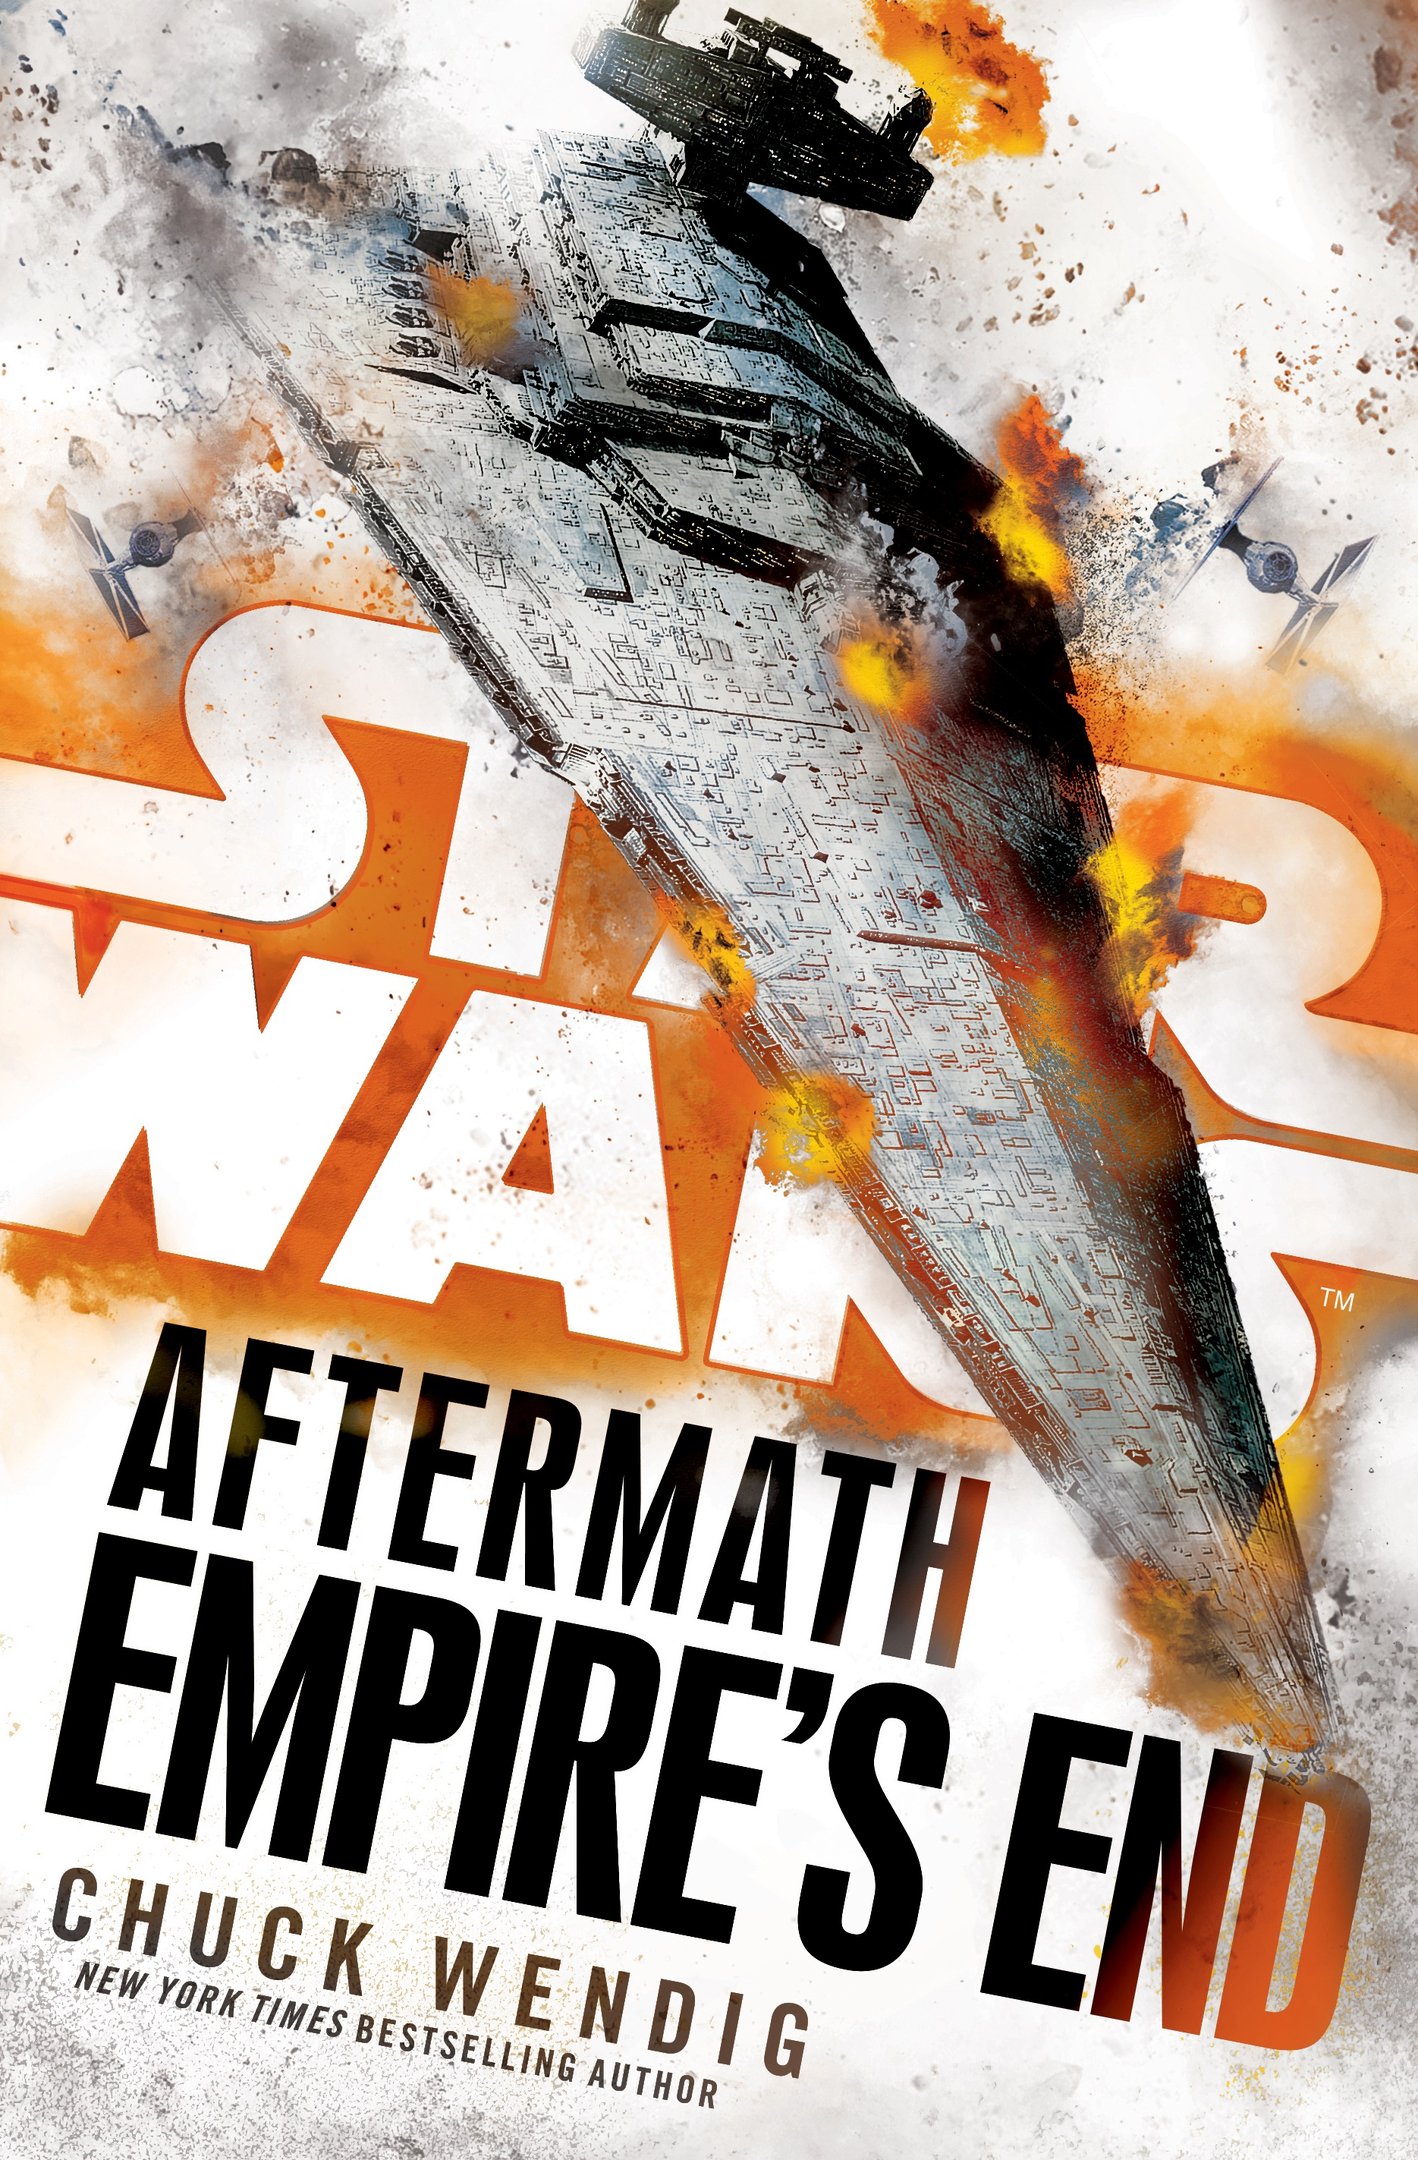 Star Wars Empire's End